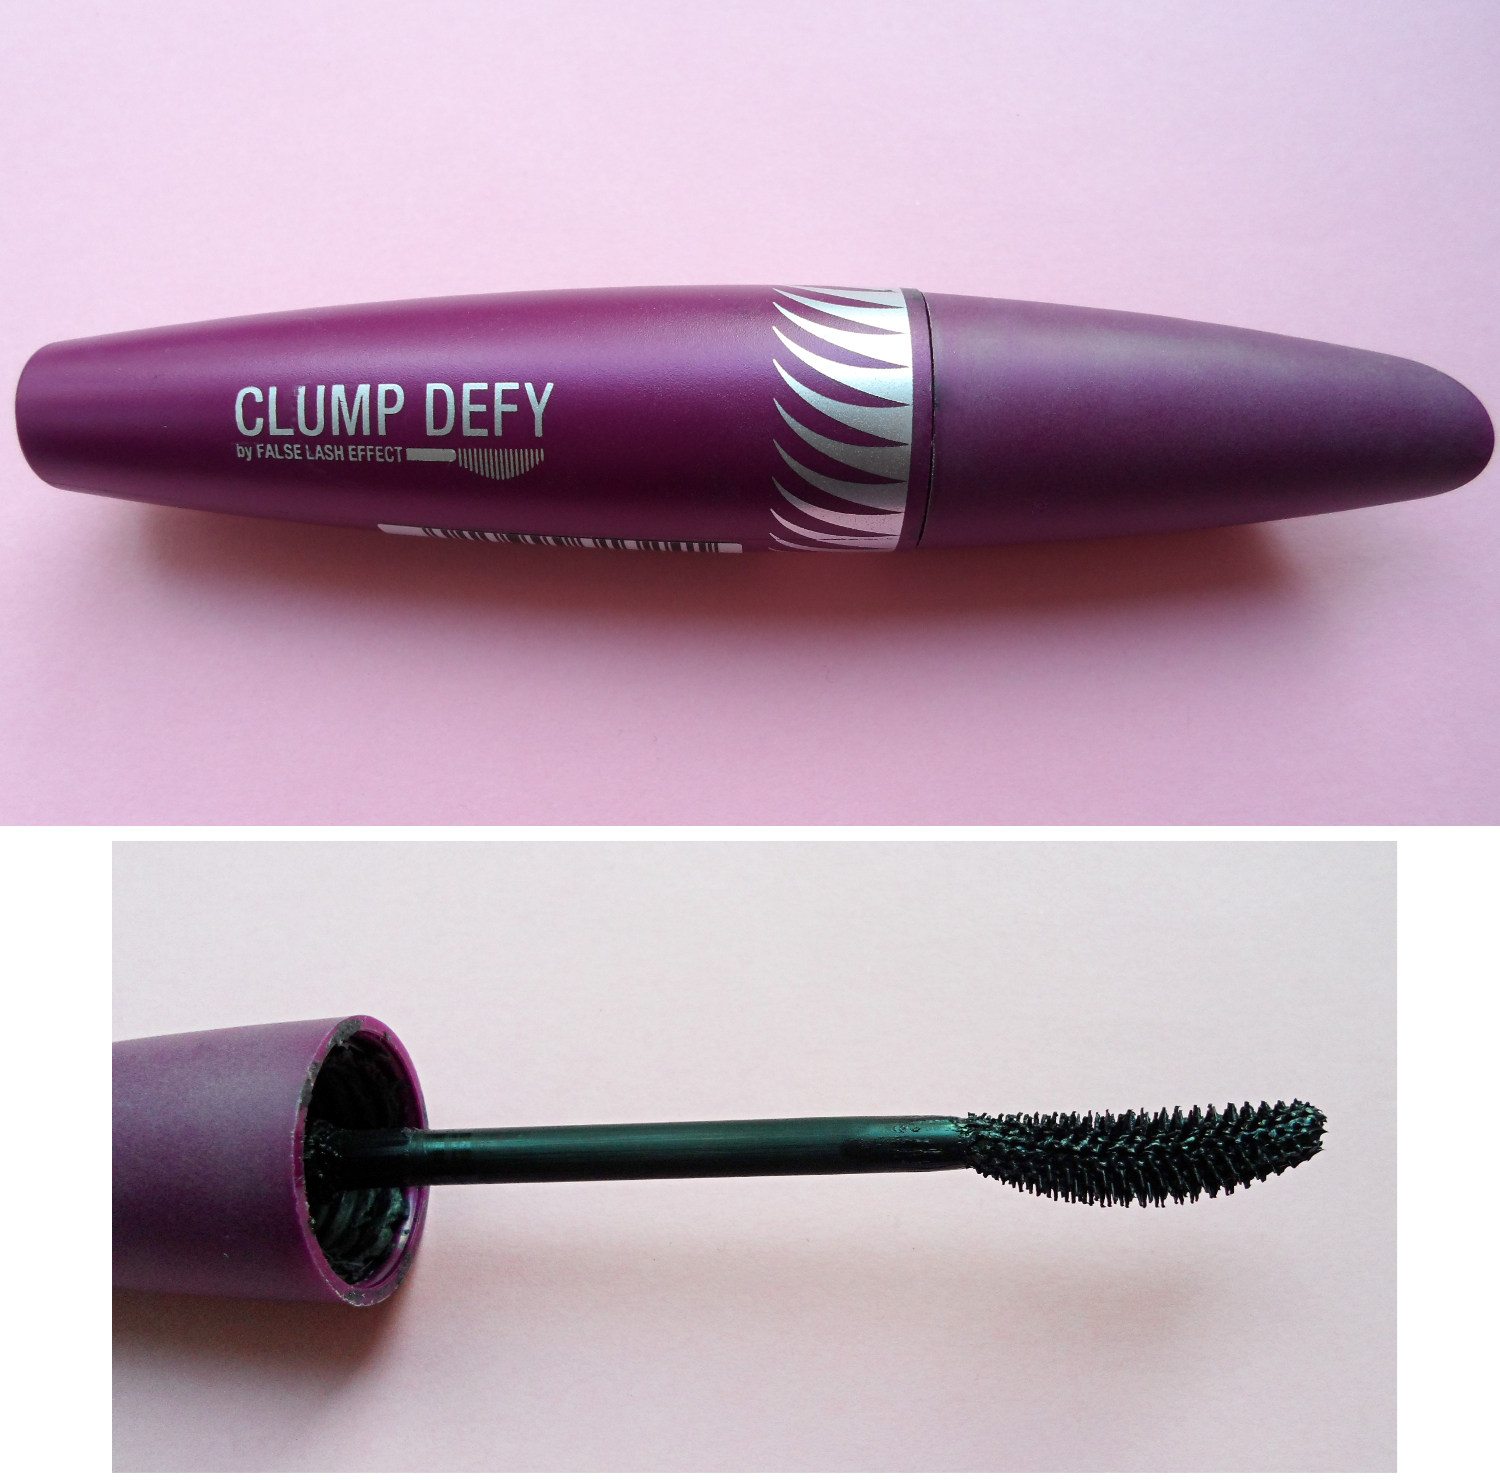 kompression Massakre Når som helst A Clump Defy Mascara by Max Factor for Perfect Lash Separation | Review &  Demo | January Girl